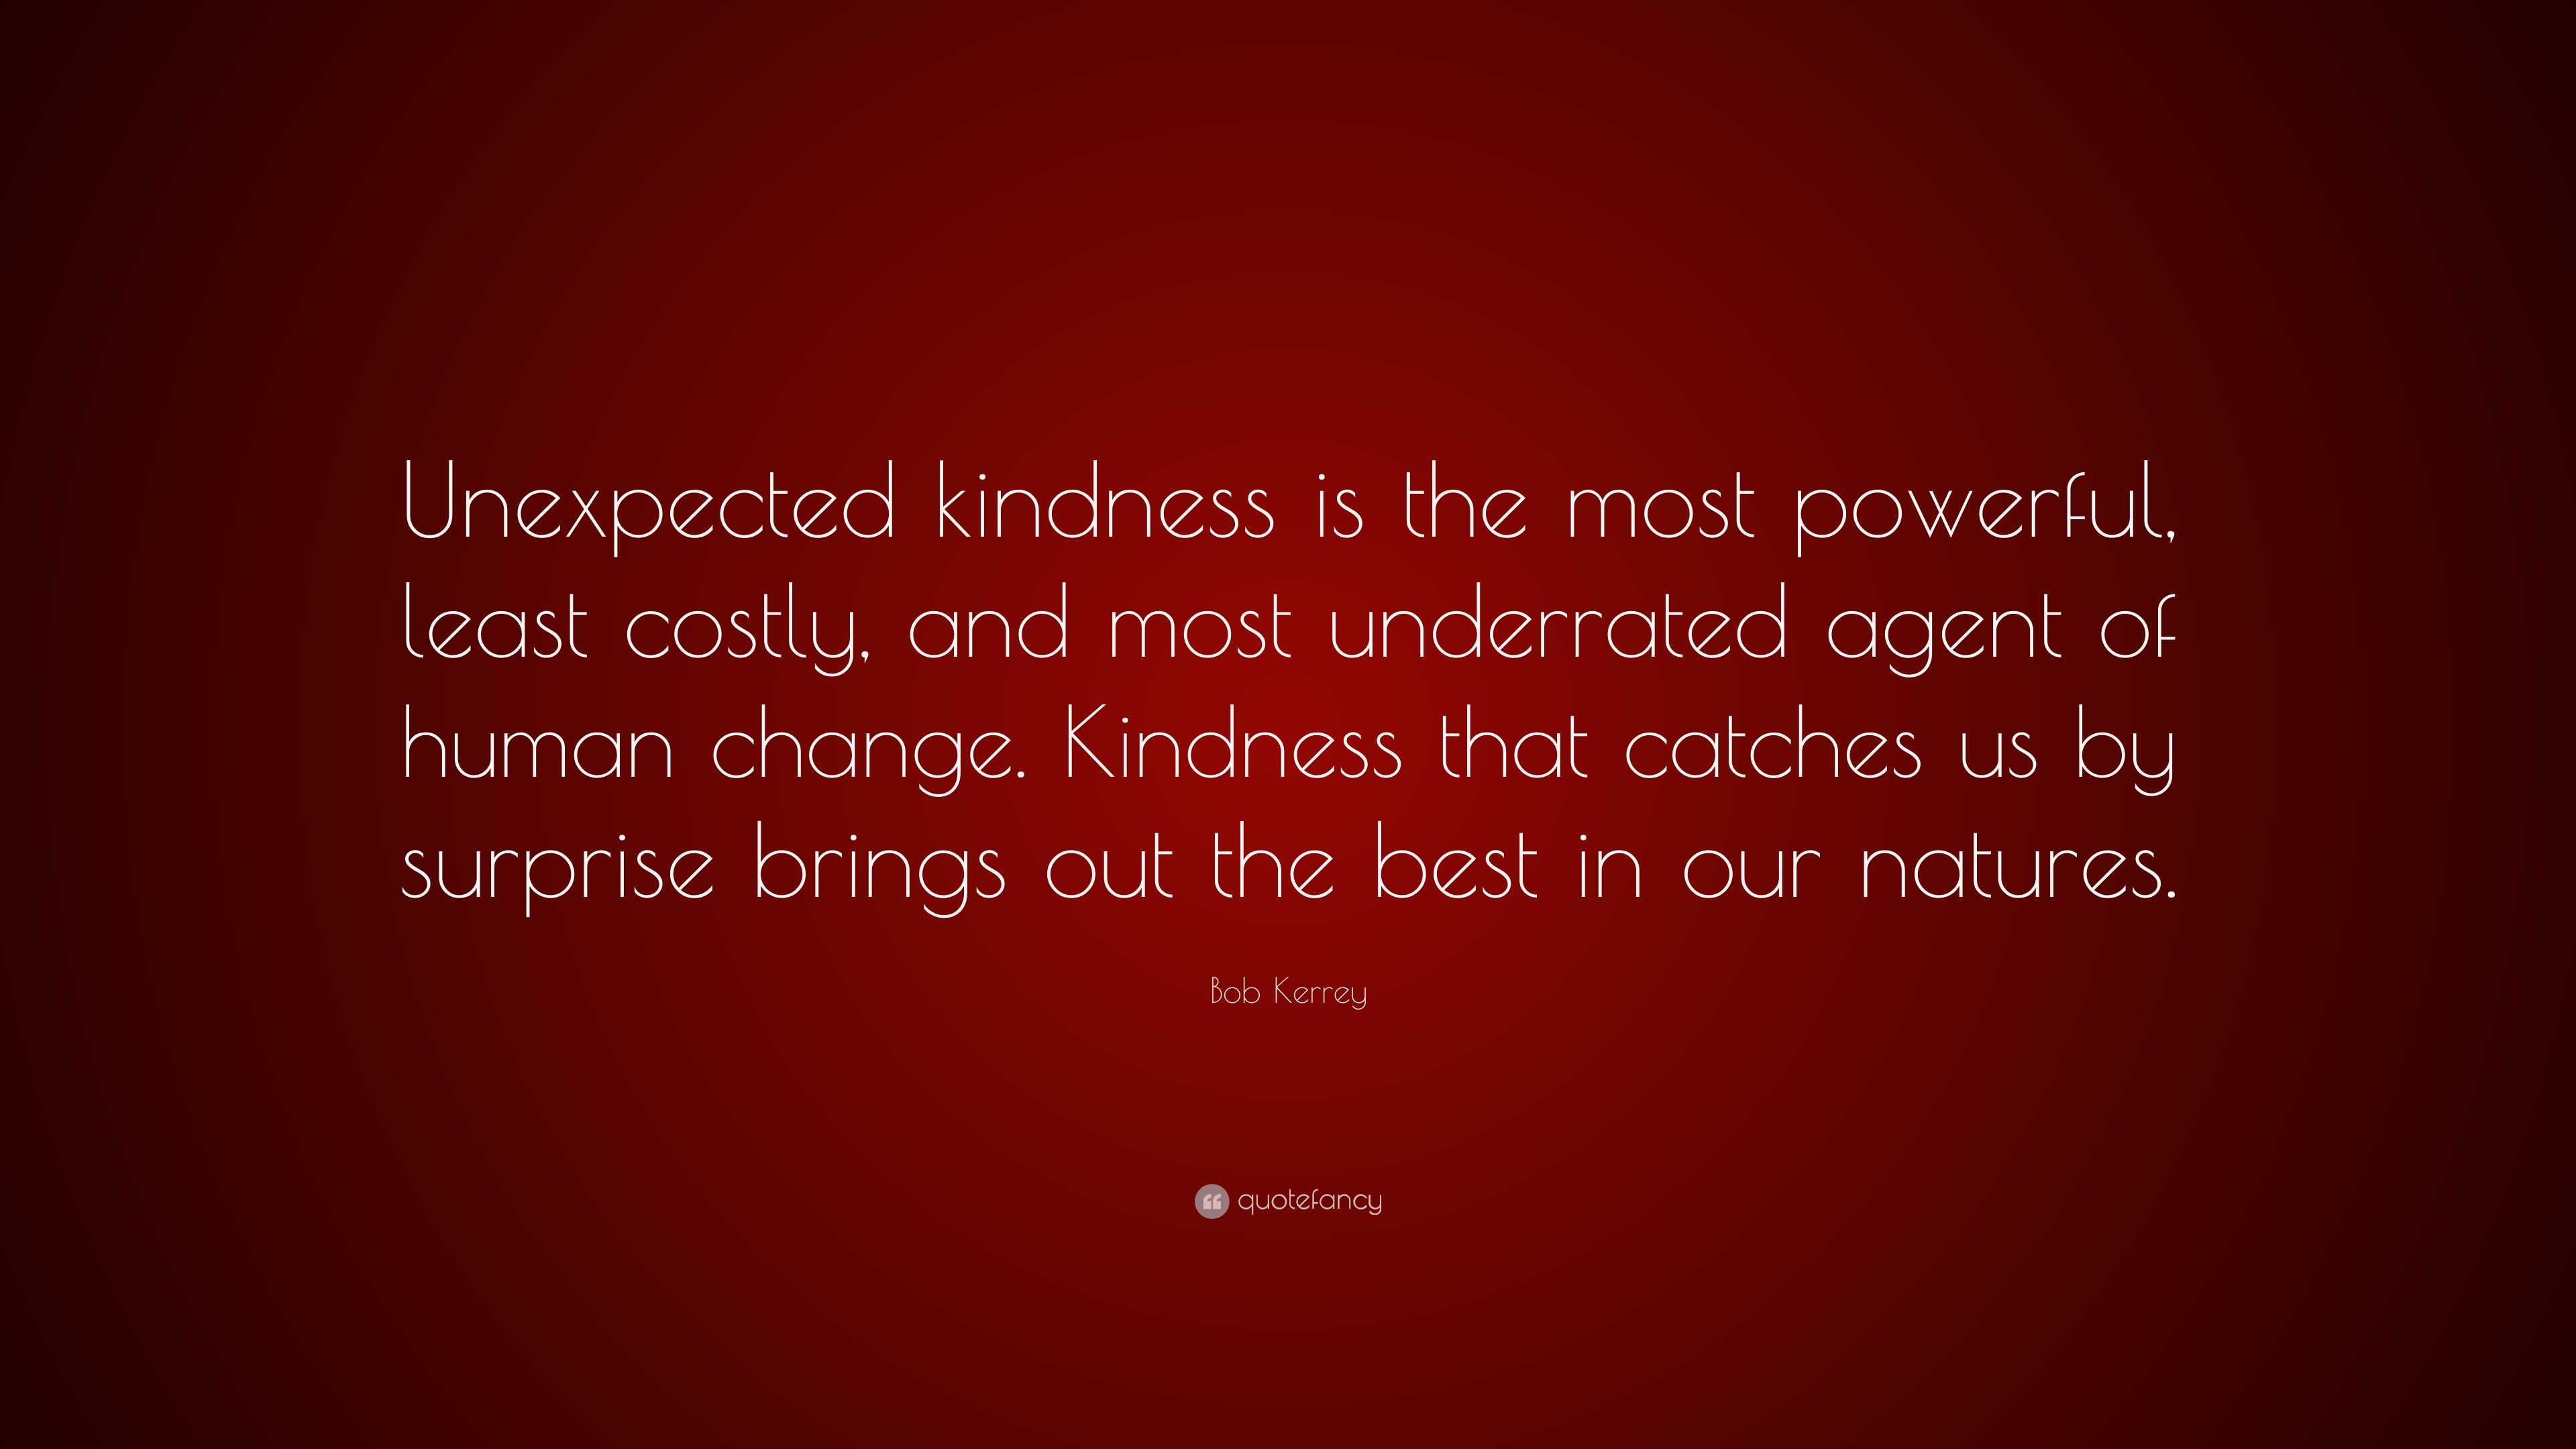 Bob Kerrey Quote: “Unexpected kindness is the most powerful, least costly, and  most underrated agent of human change. Kindness that catches”